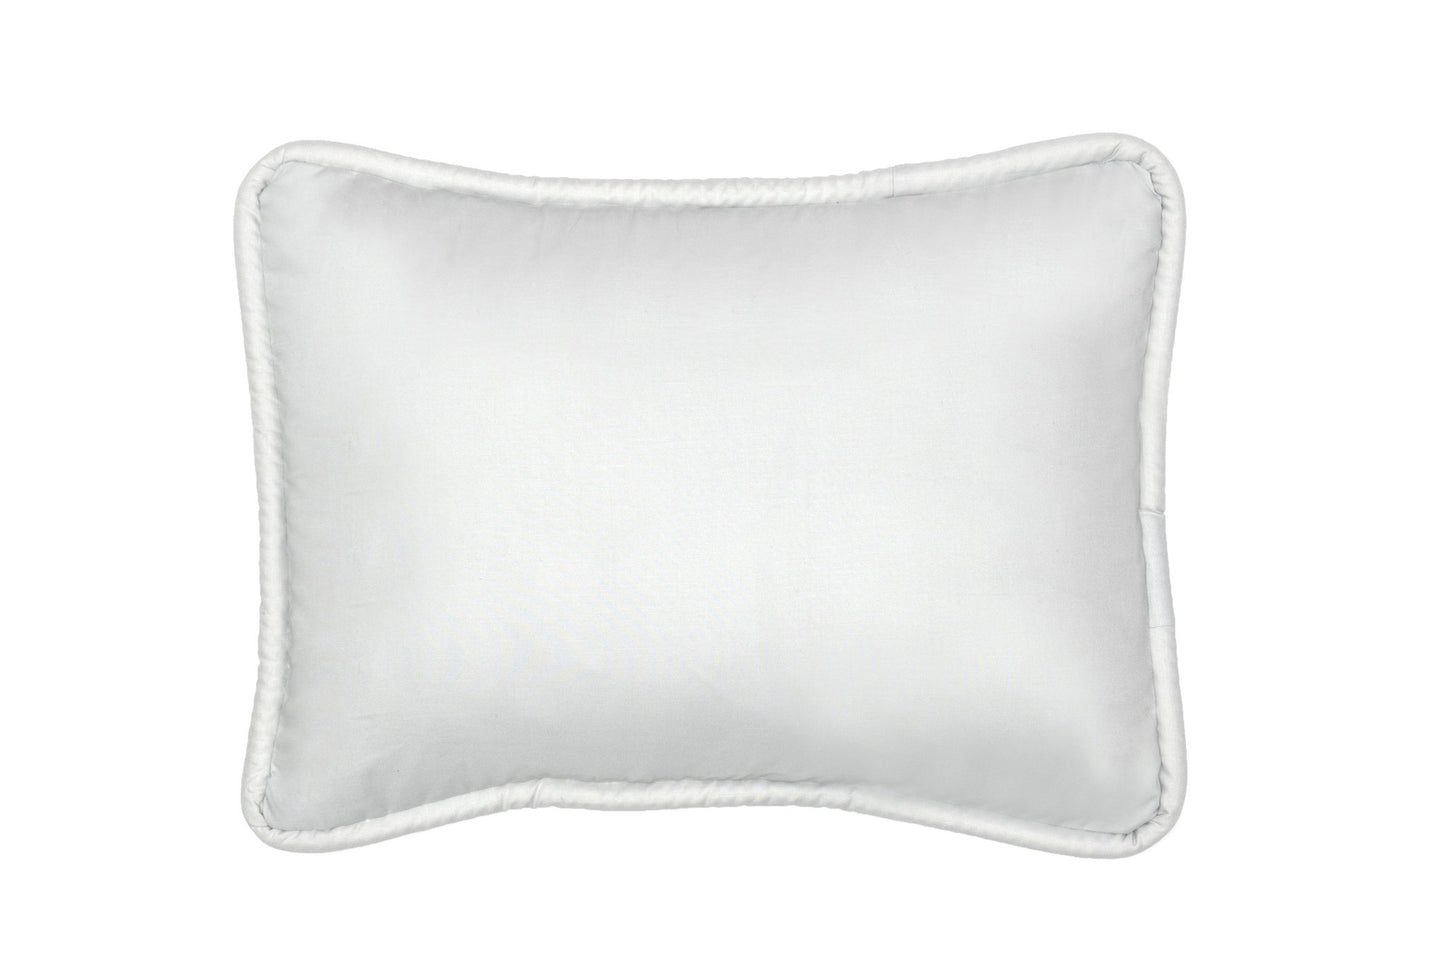 Solid Silver Gray Decorative Pillow with Piping - New Arrivals Inc